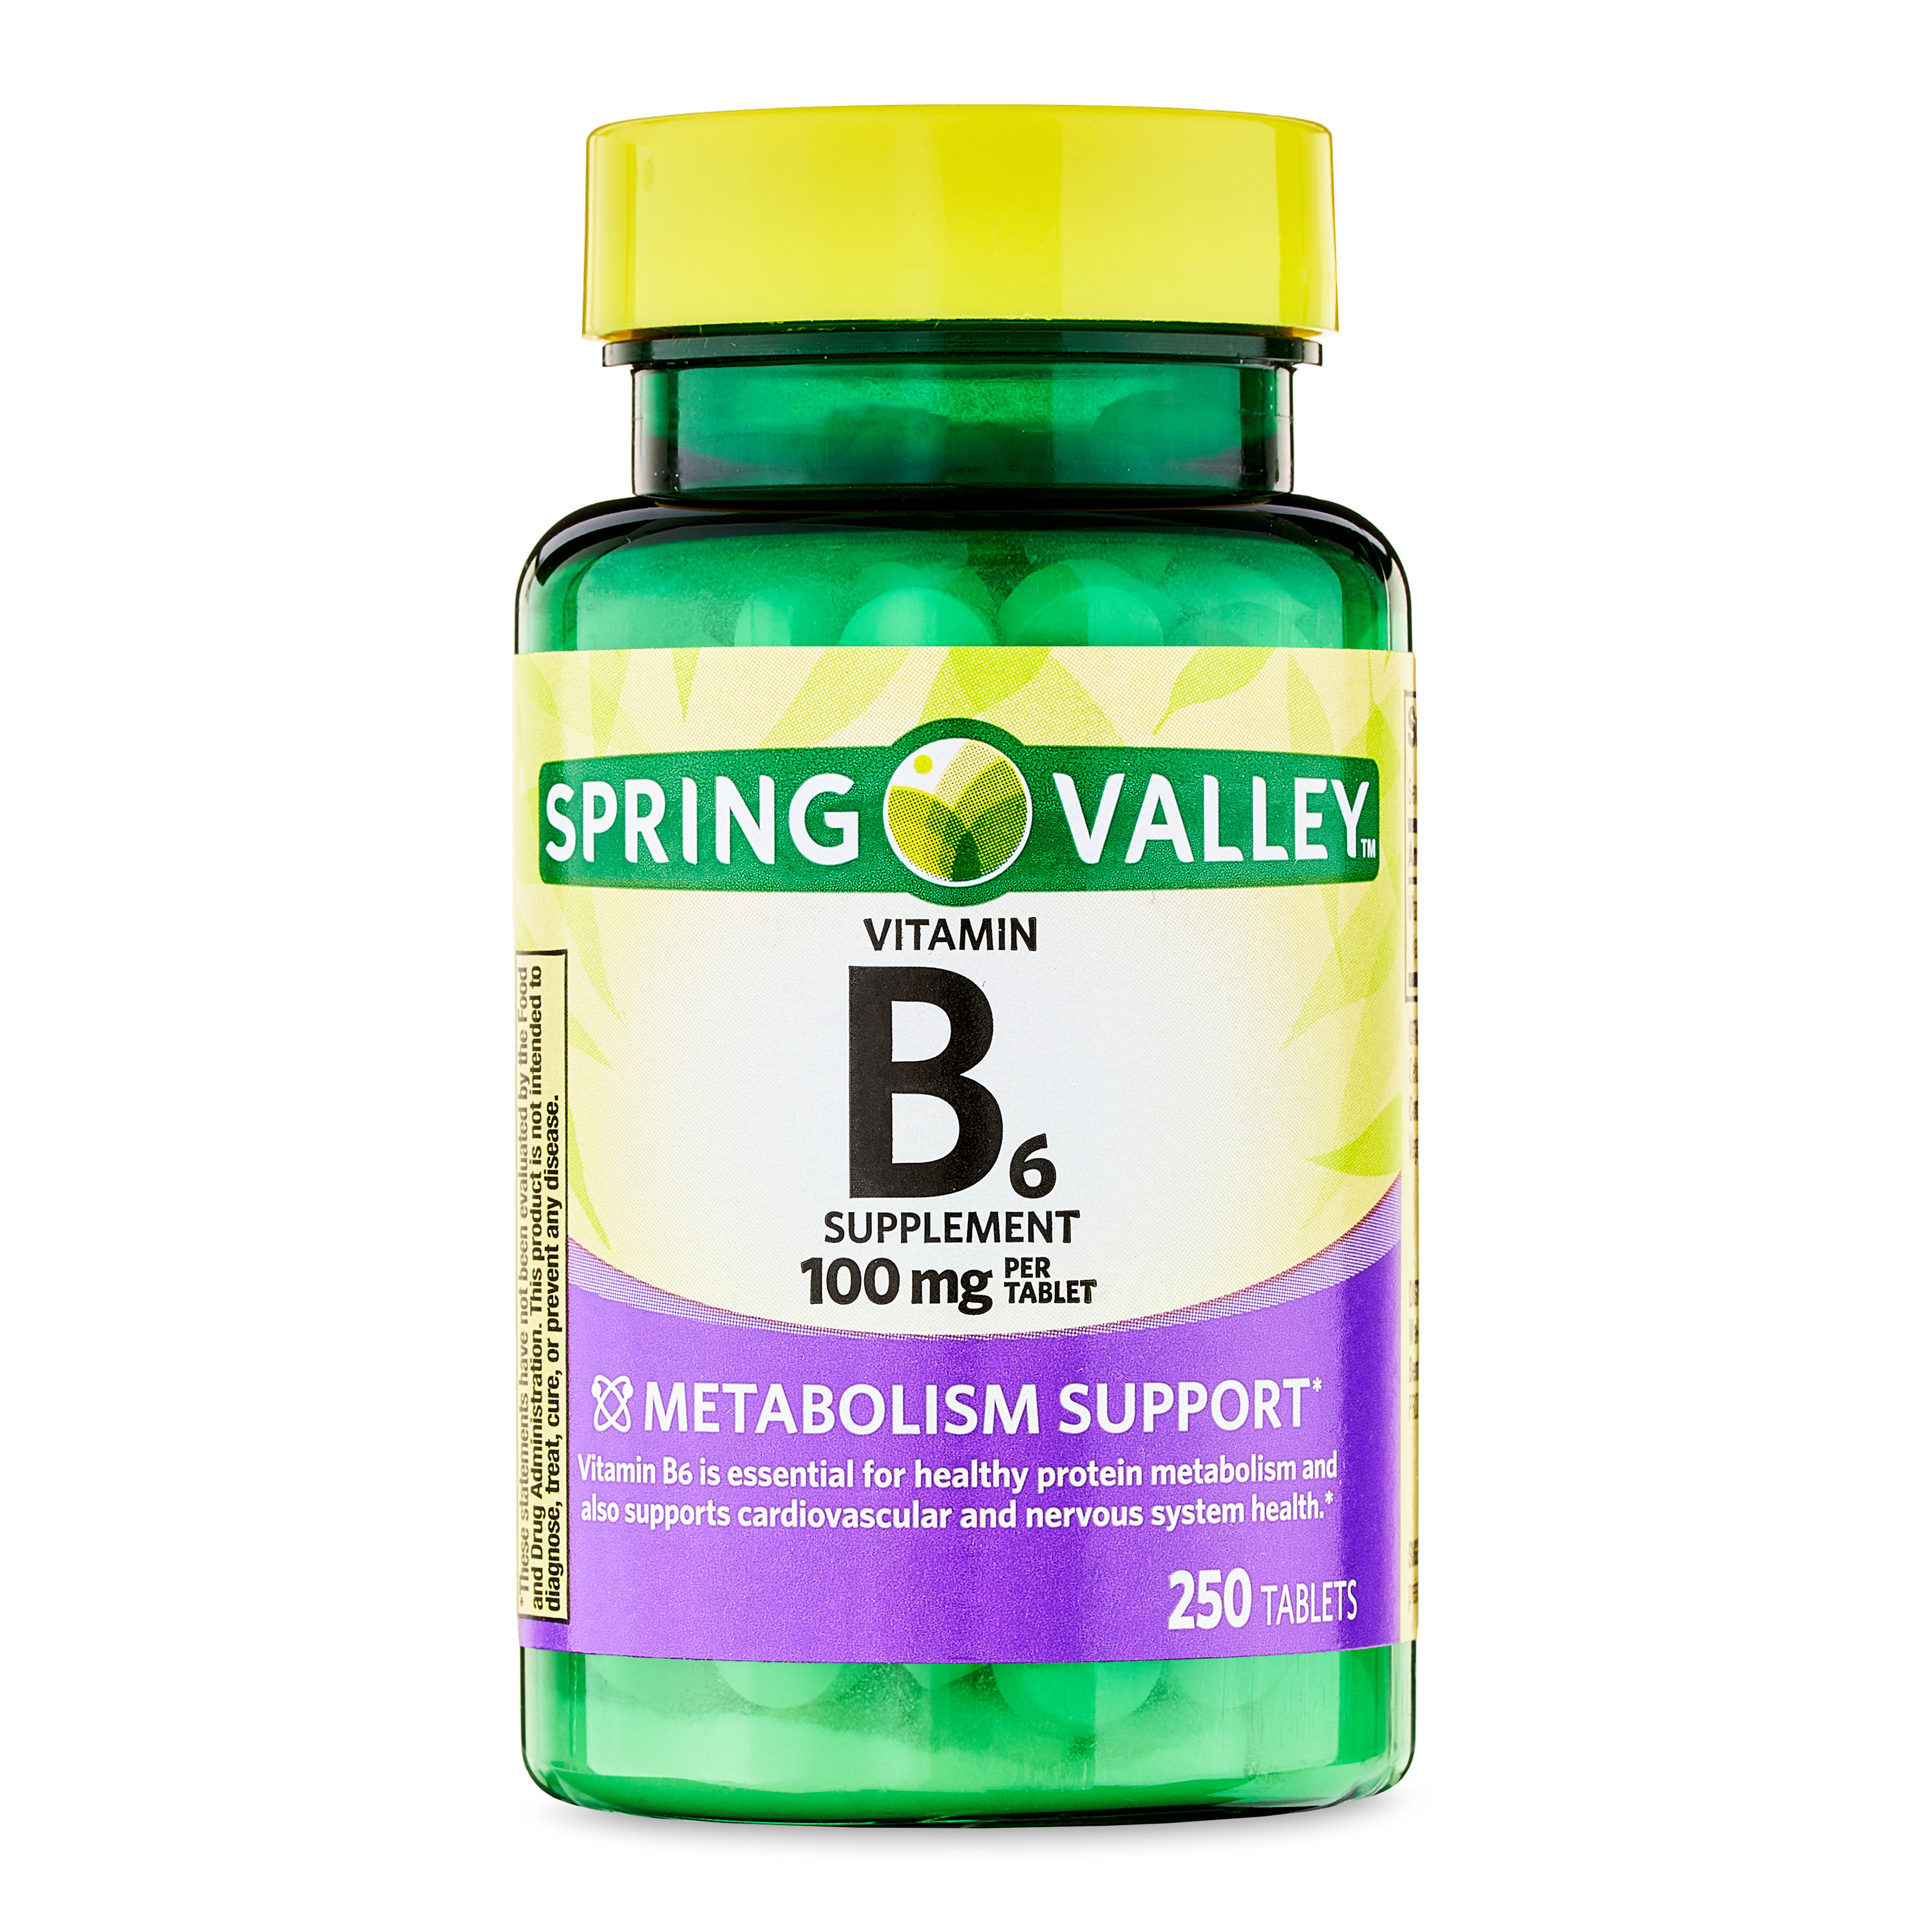 Spring Valley Vitamin B6 Supplement, 100 mg, 250 Count - image 1 of 15